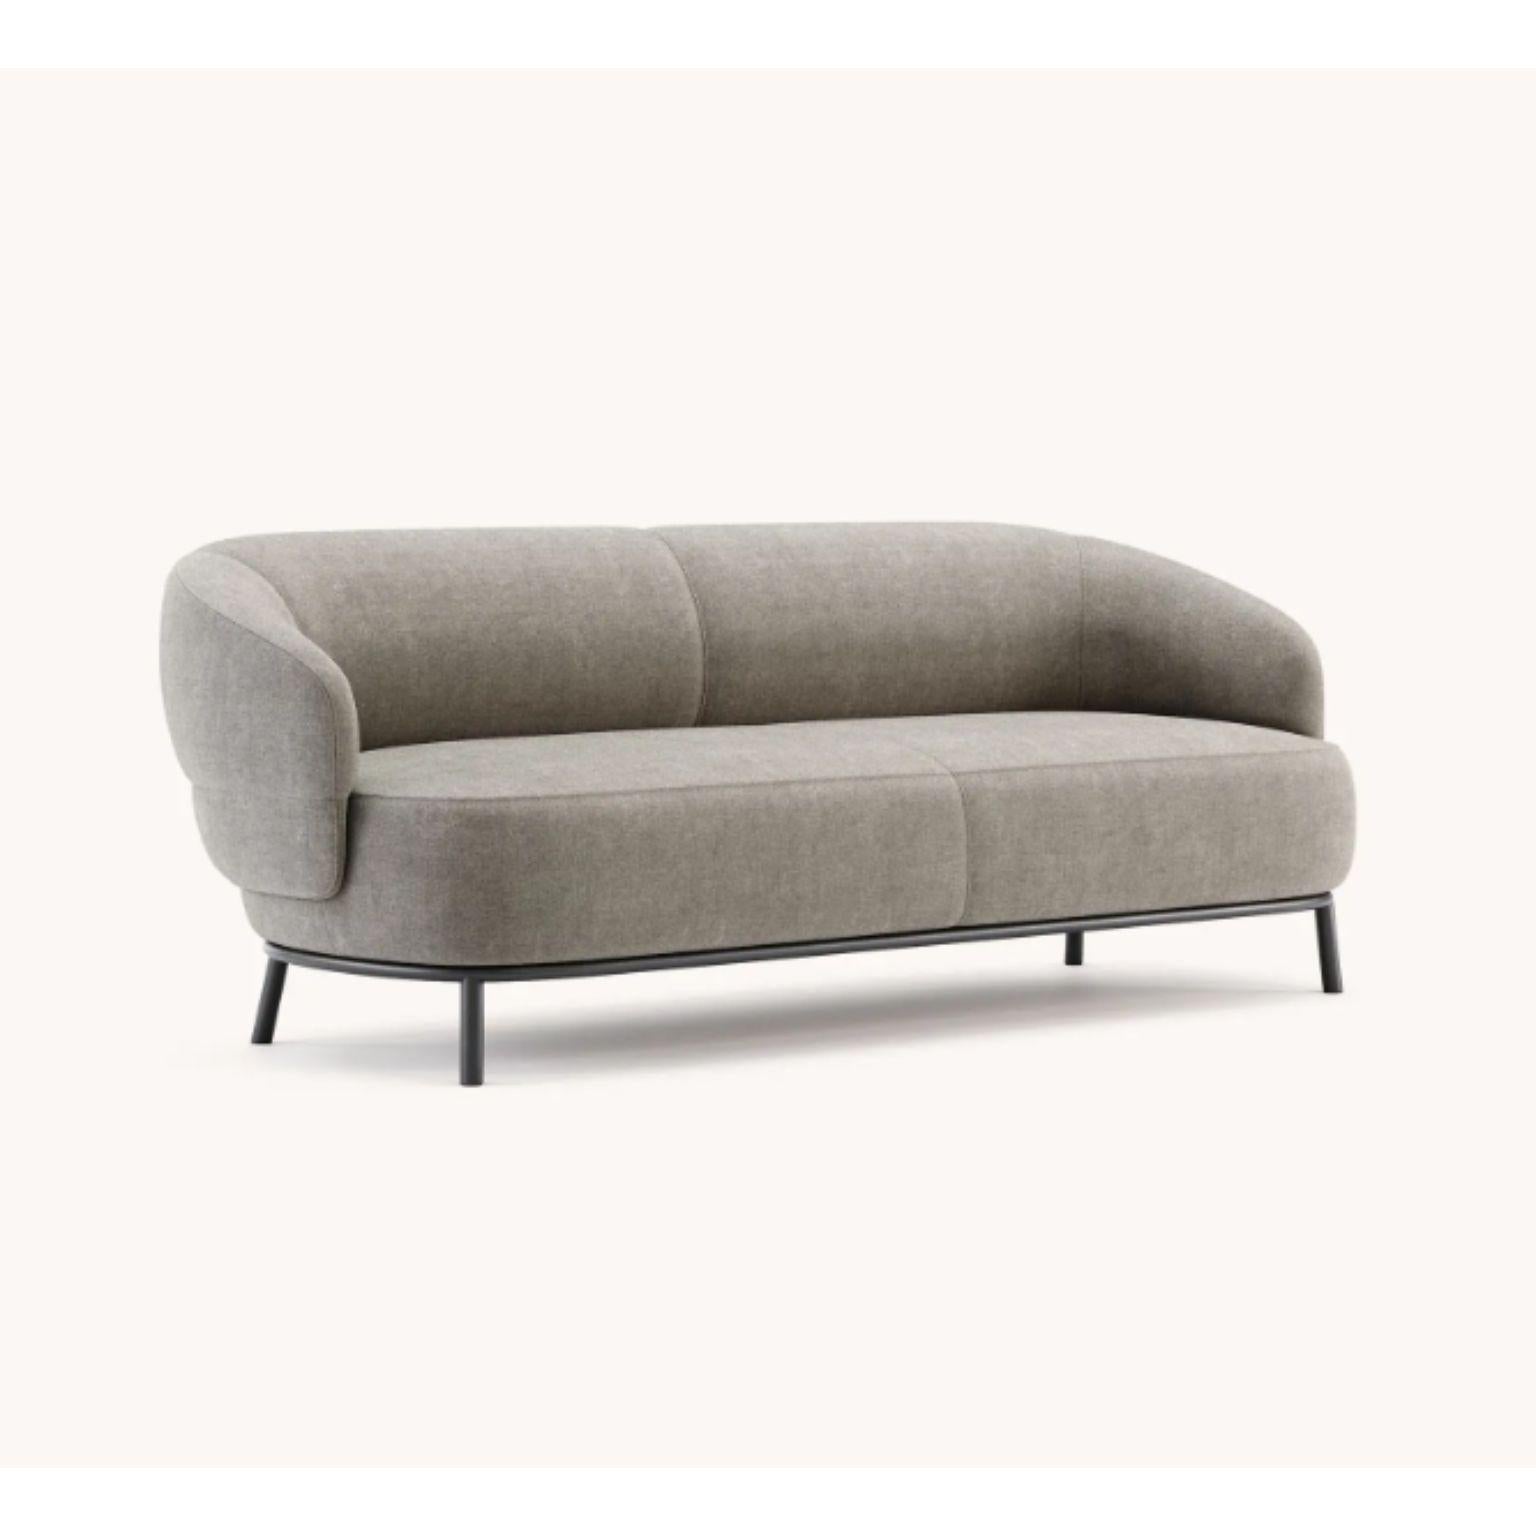 Juliet 2 seats sofa by Domkapa
Materials: black texturized steel, fabric (Logone 01). 
Dimensions: W 202 x D 86 x H 73 cm.
Also available in different materials. 

Inspired by a concept of elegance, comfort, and intimacy, Juliet sofa is a